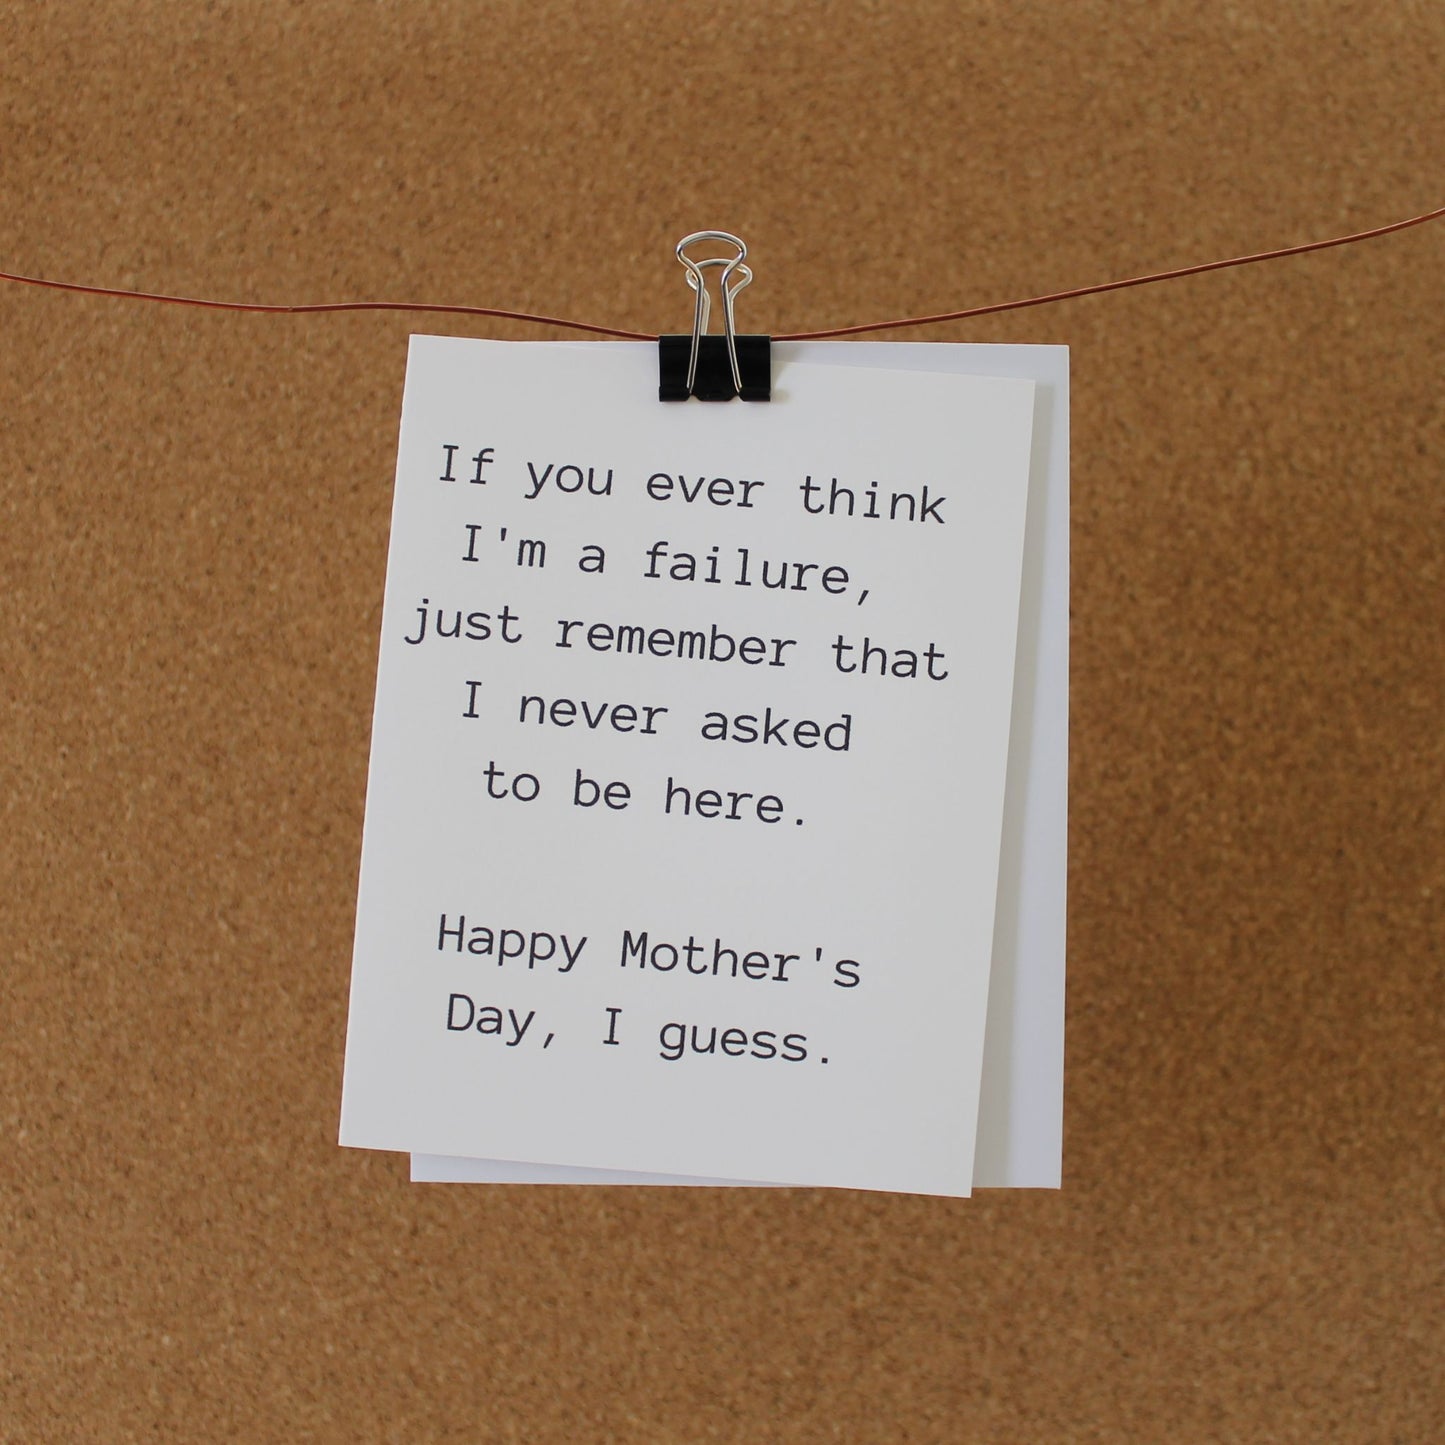 Funny Mother's Day Card: "If you ever think I'm a failure, just remember that I never asked to be here."